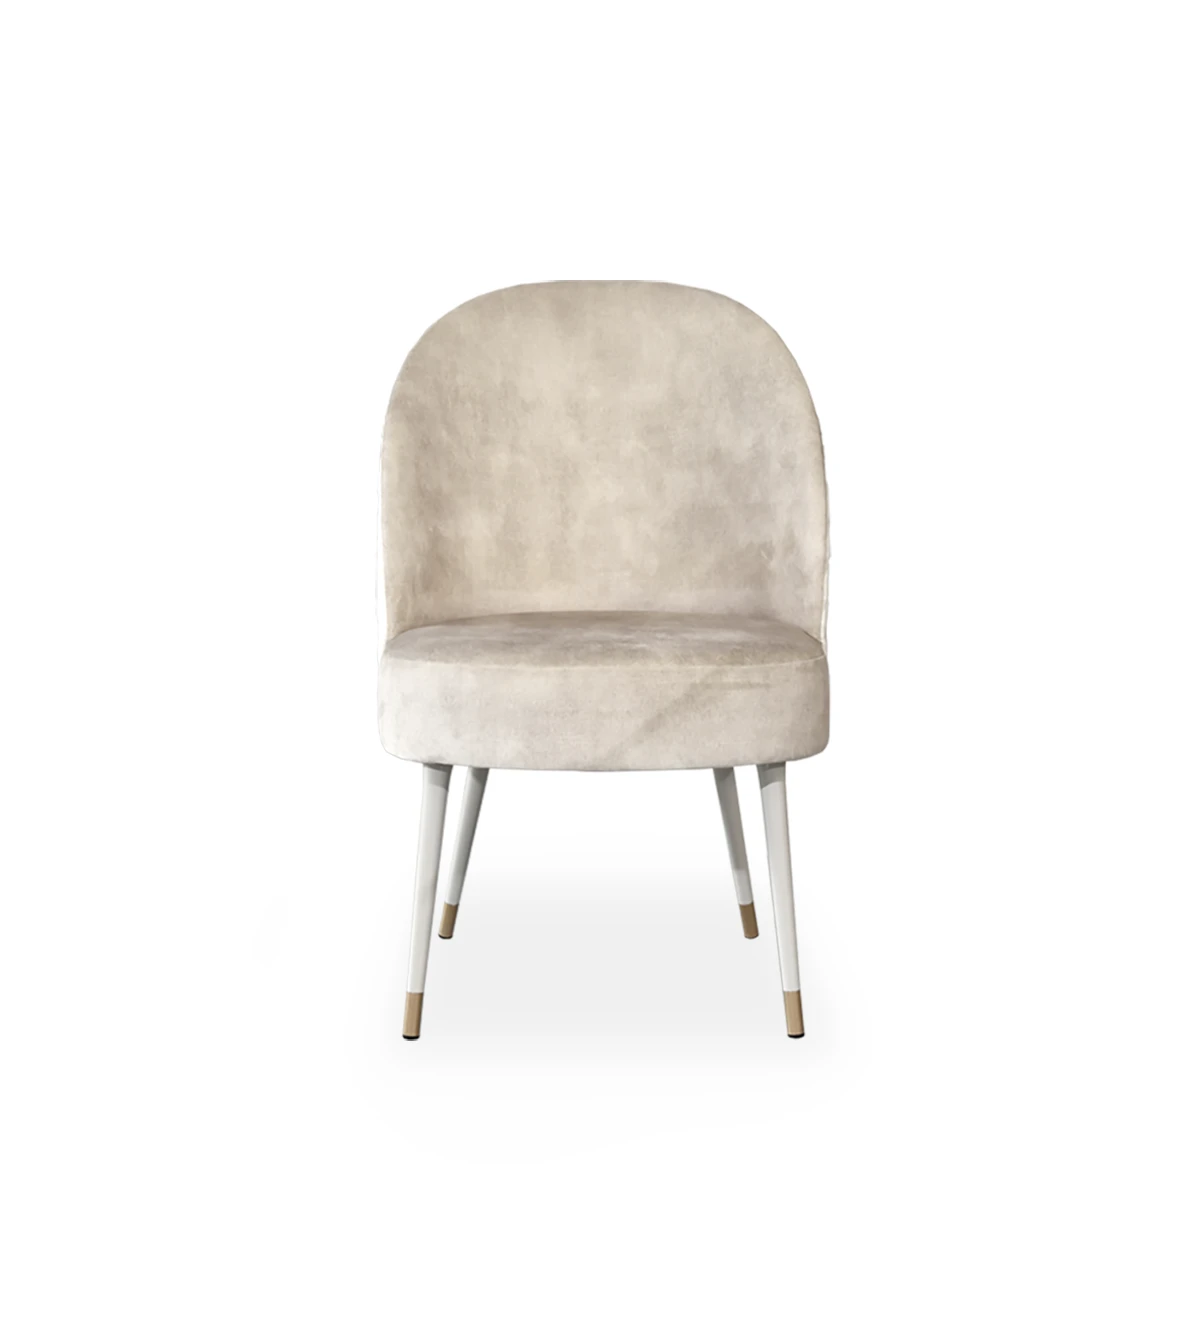 Armchair upholstered in fabric, with pearl lacquered feet and gold detailing.